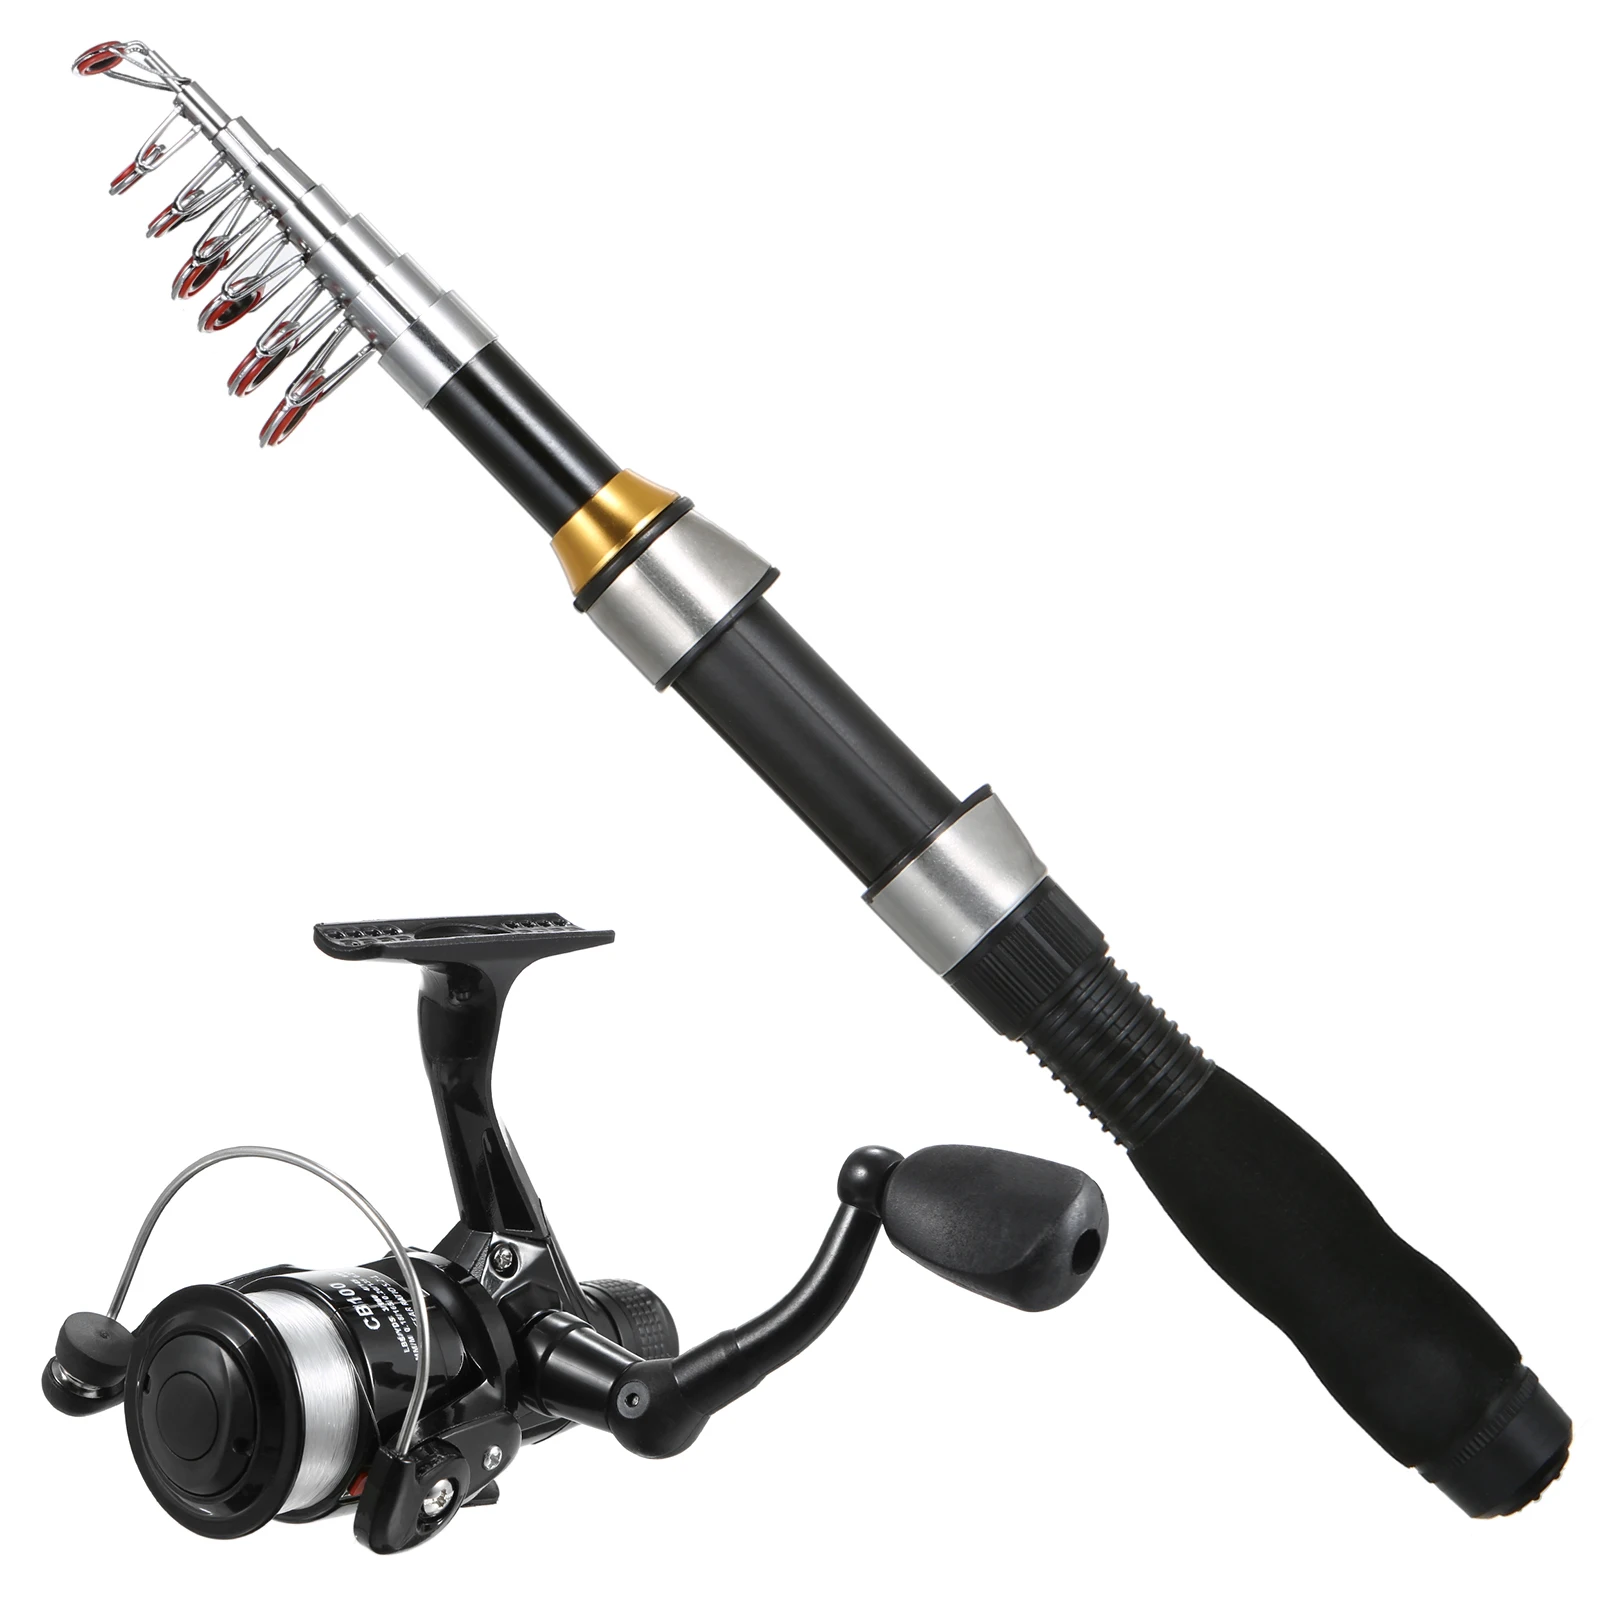 1.7m Telescopic Fishing Rod Spinning Reel Storage Case Tackle Set Fishing  Rod Reel Combo Full Kit For Saltwater and Freshwater